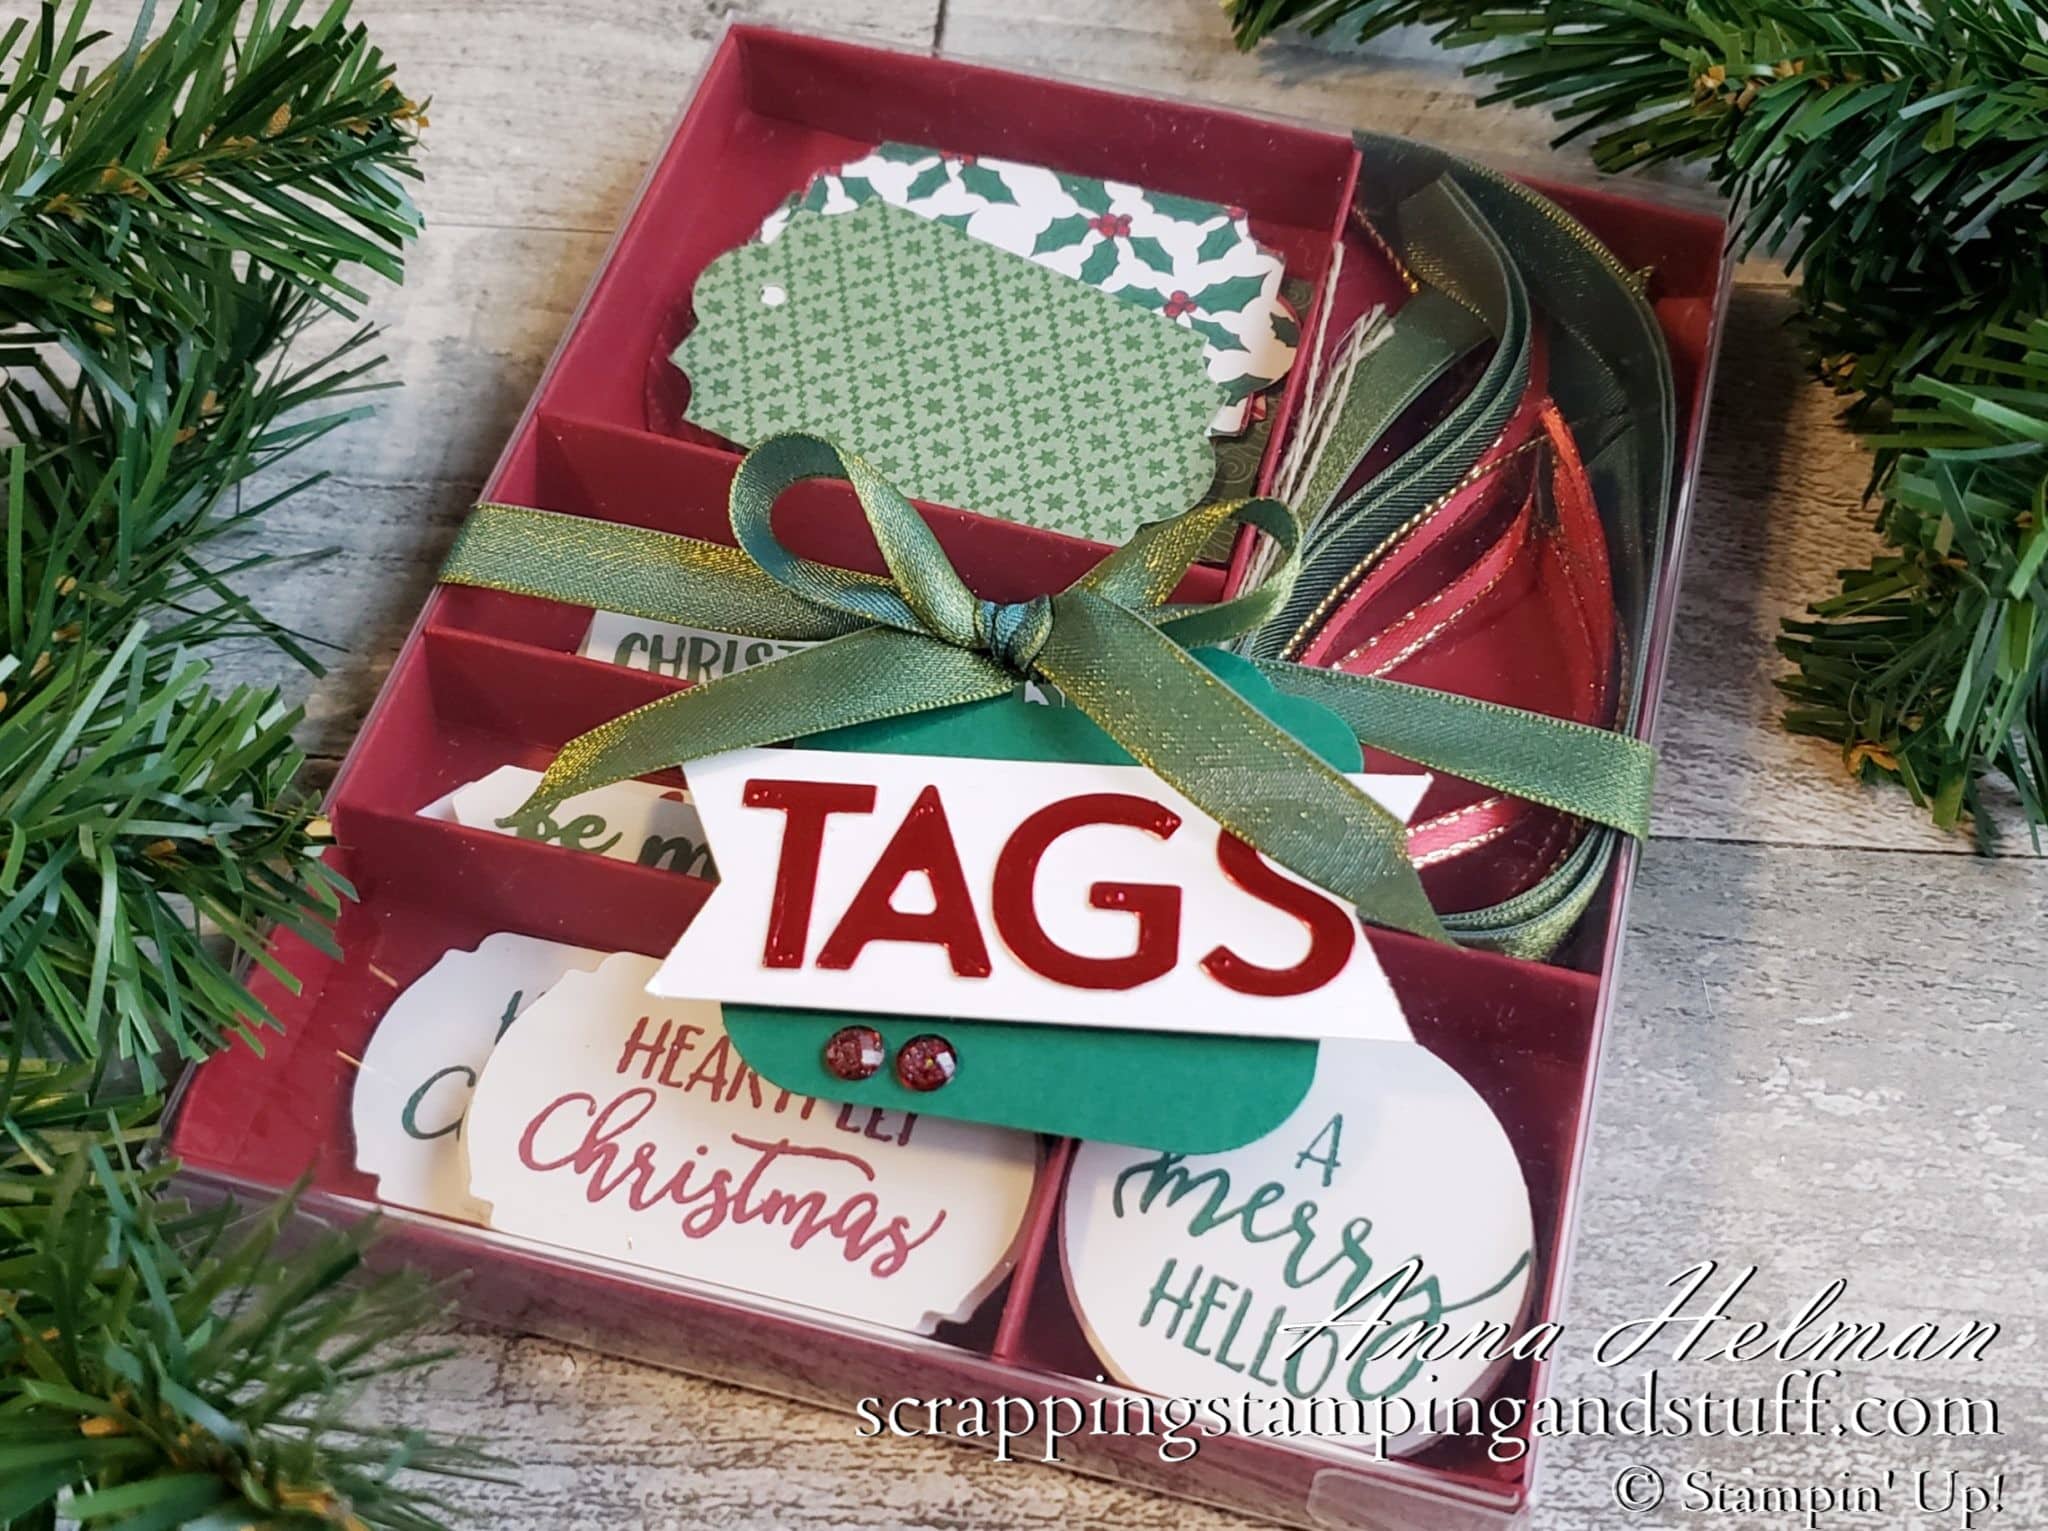 DIY Tag Kit – Day 12 of 12 Days of DIY Gift Ideas